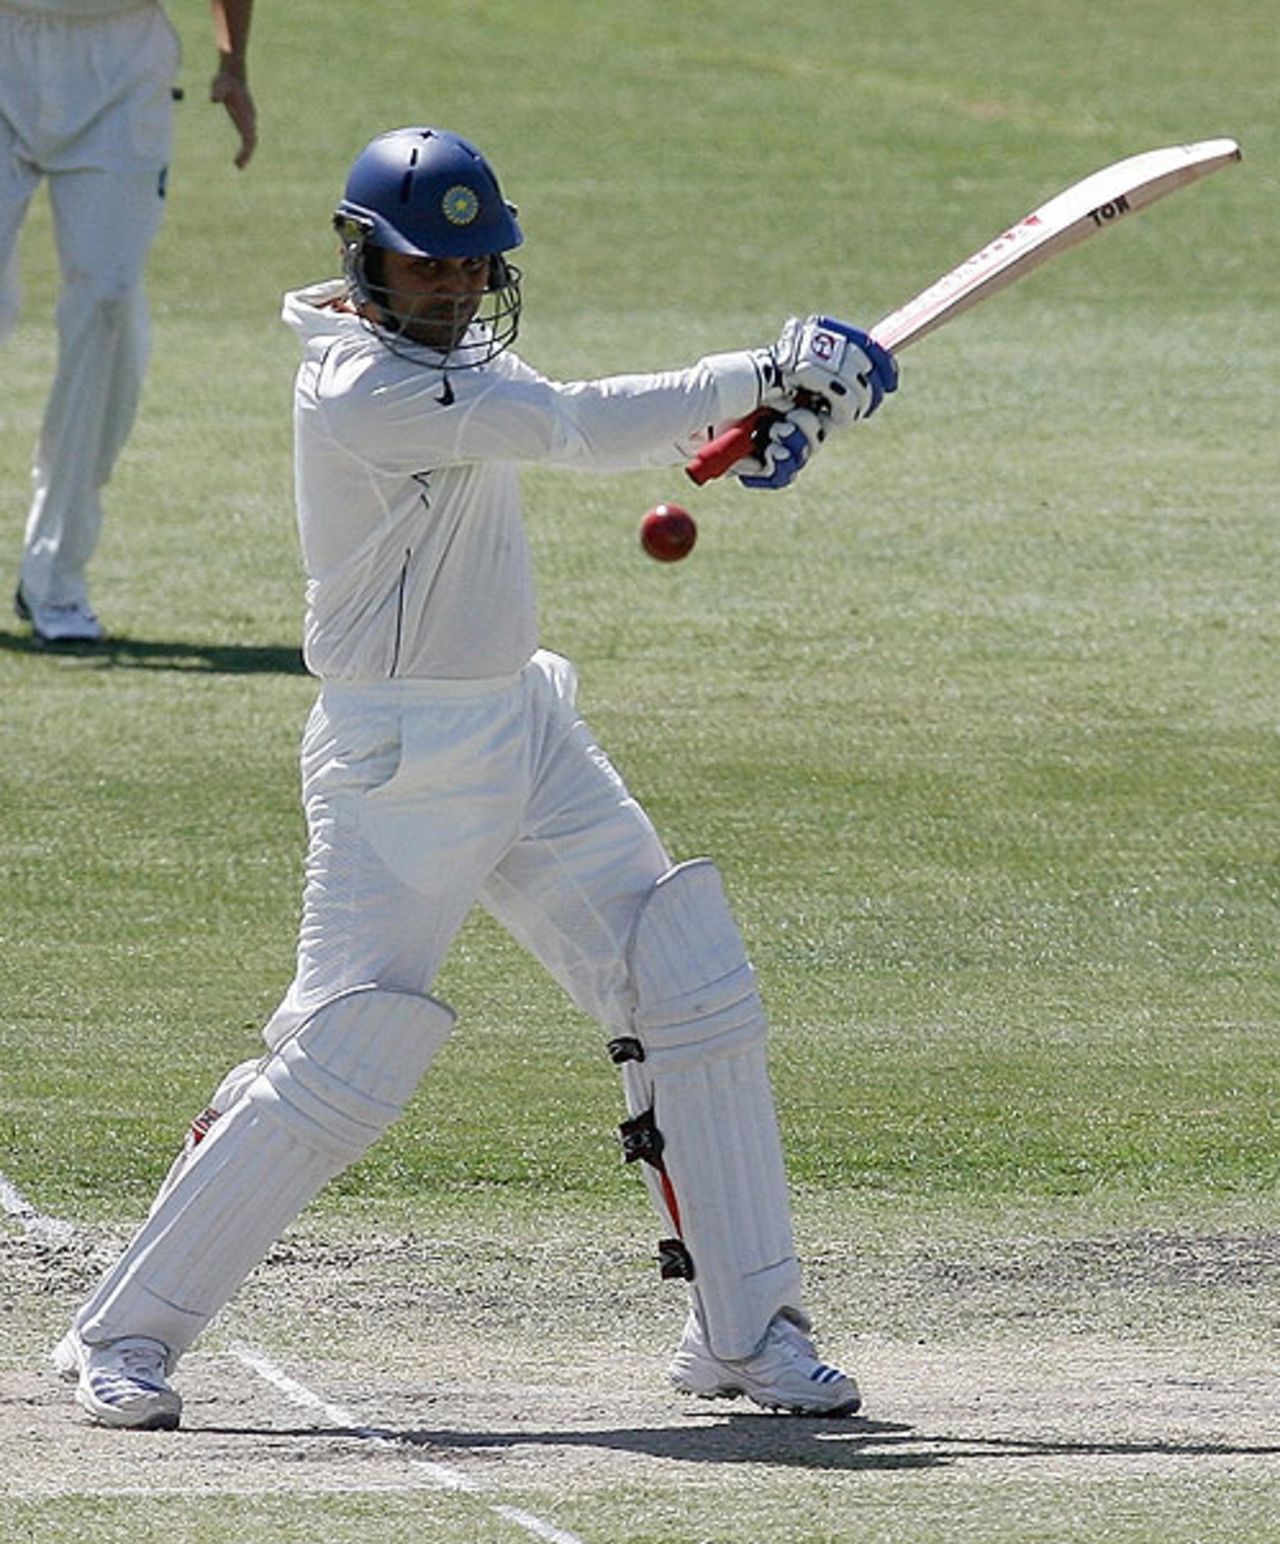 Virender Sehwag carves one away, ACT XI v Indians, 3rd day, Canberra, January 12, 2008